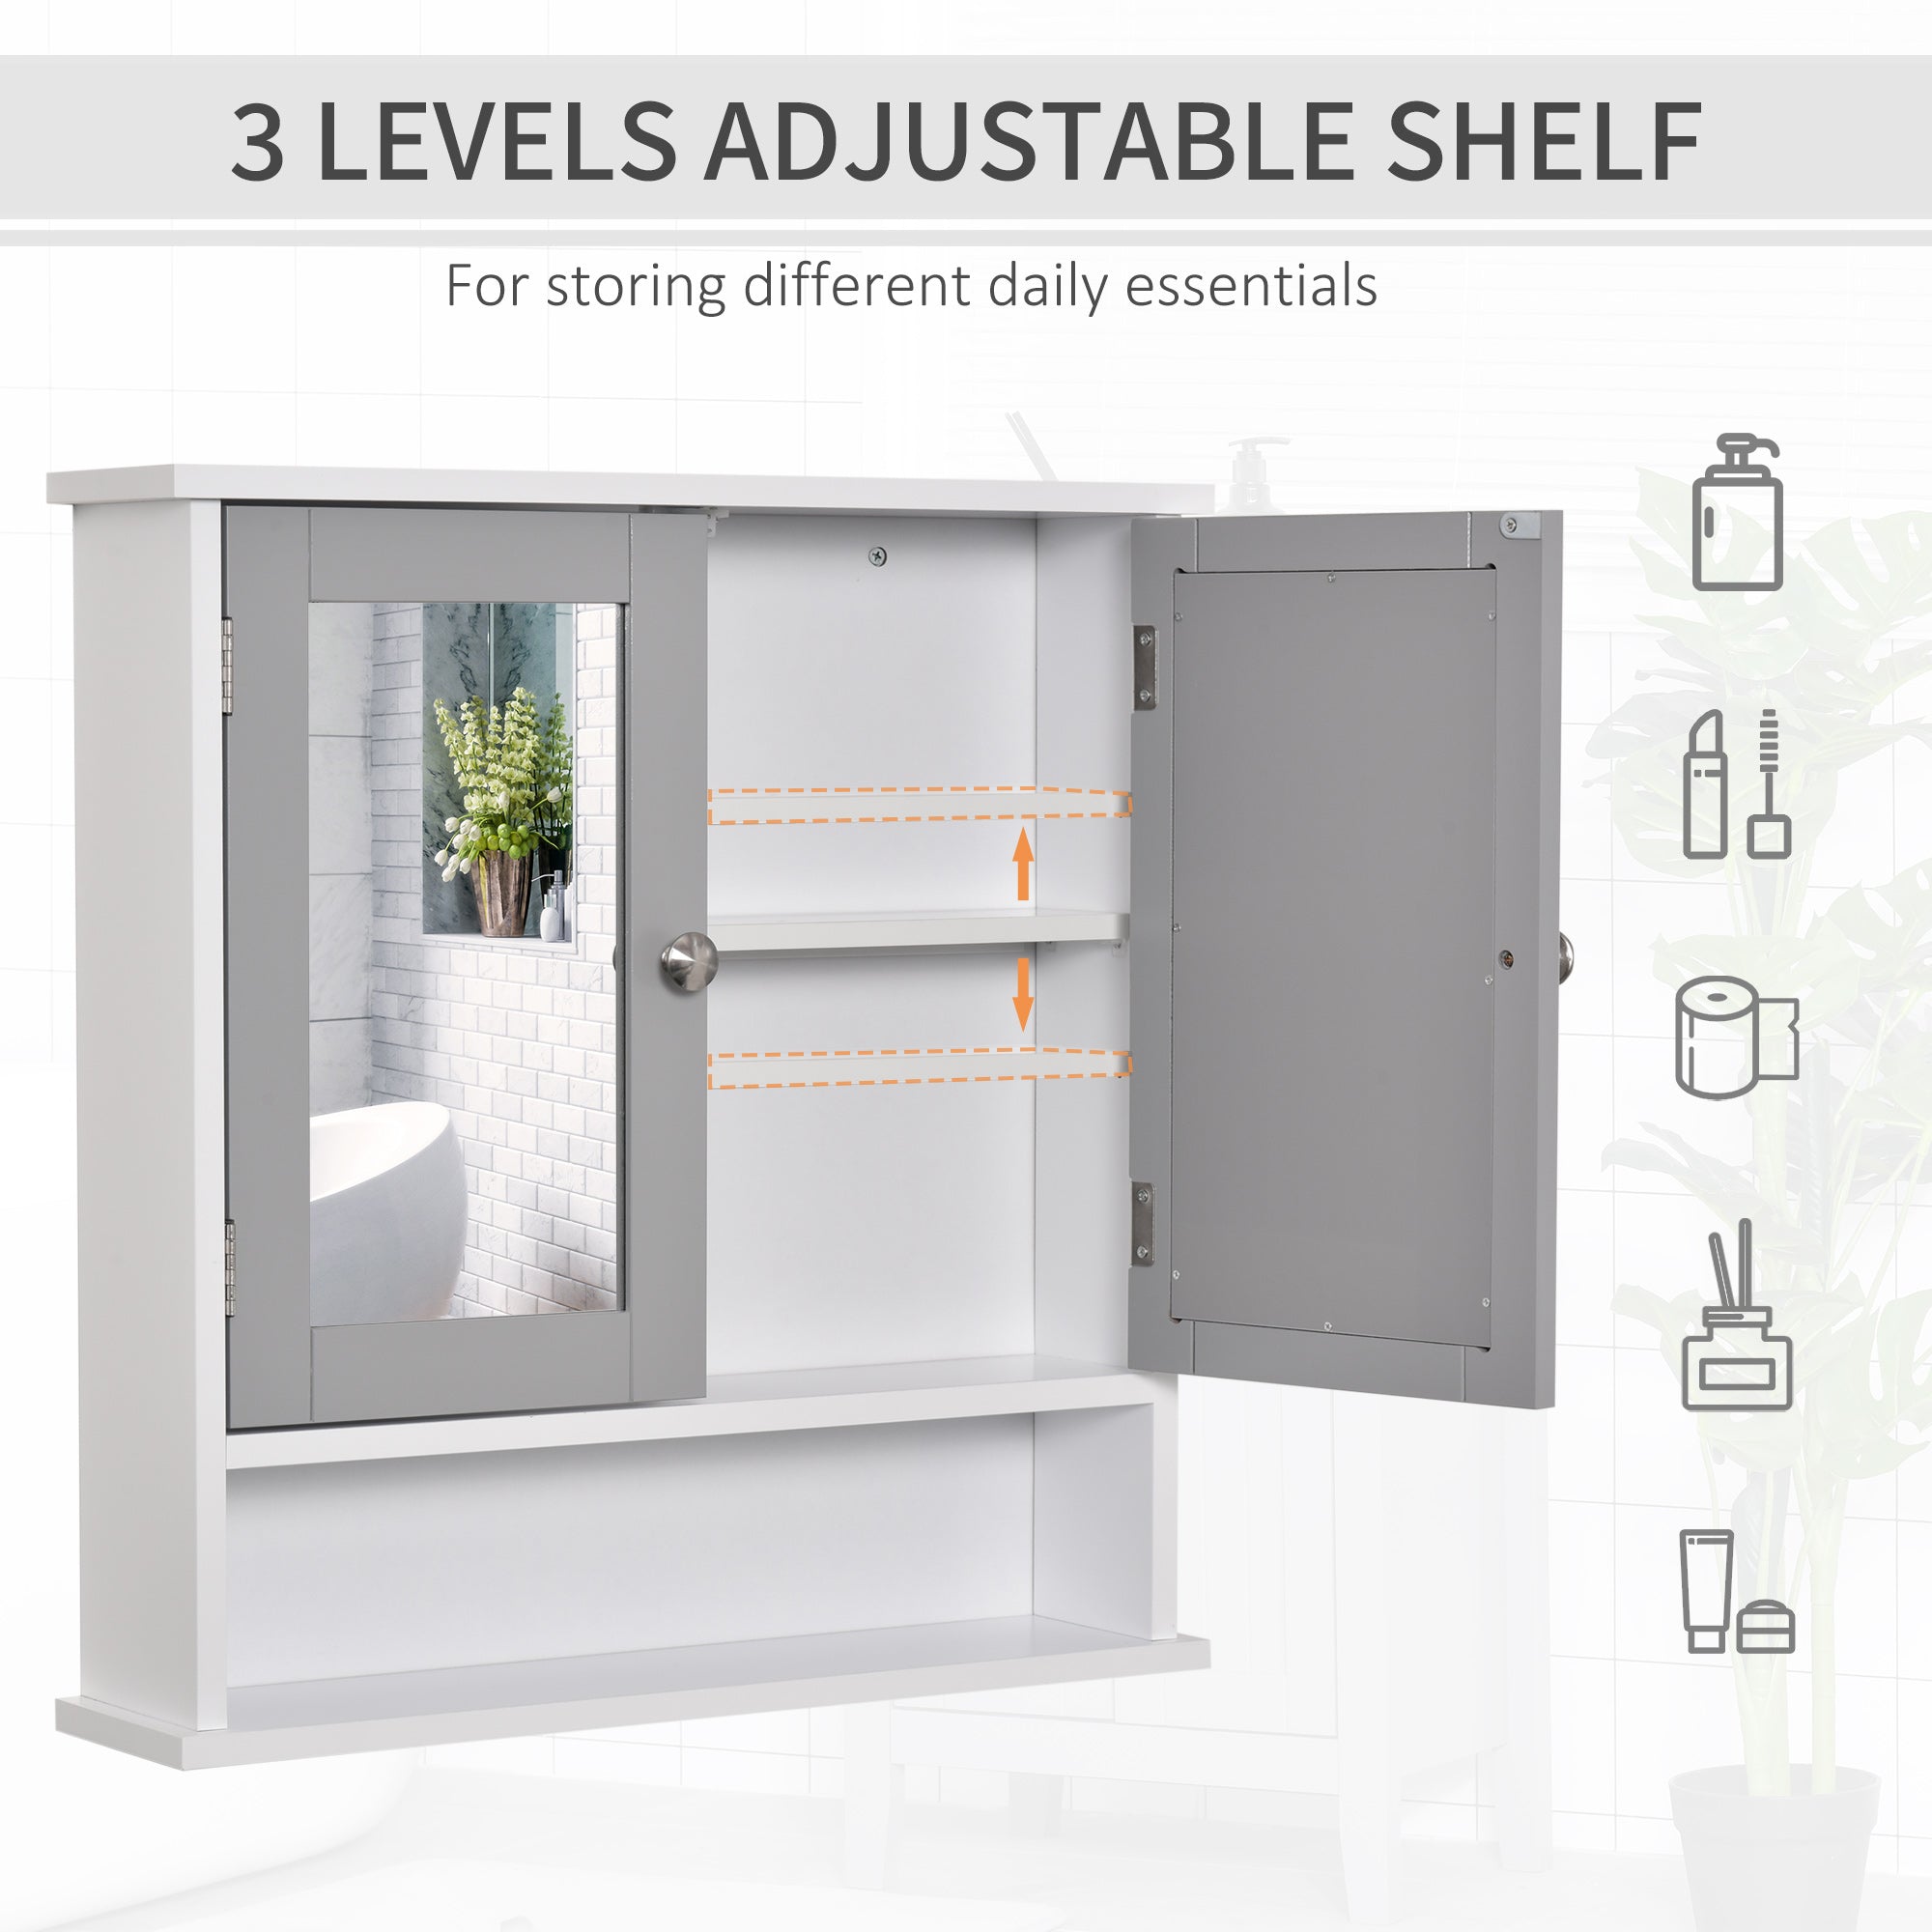 kleankin Mirror Cabinet Wall Mounted with Double Mirrored Doors, Hanging Cabinet with Cupboard and Shelf, Bathroom Wall Storage Organizer, Grey - Inspirely